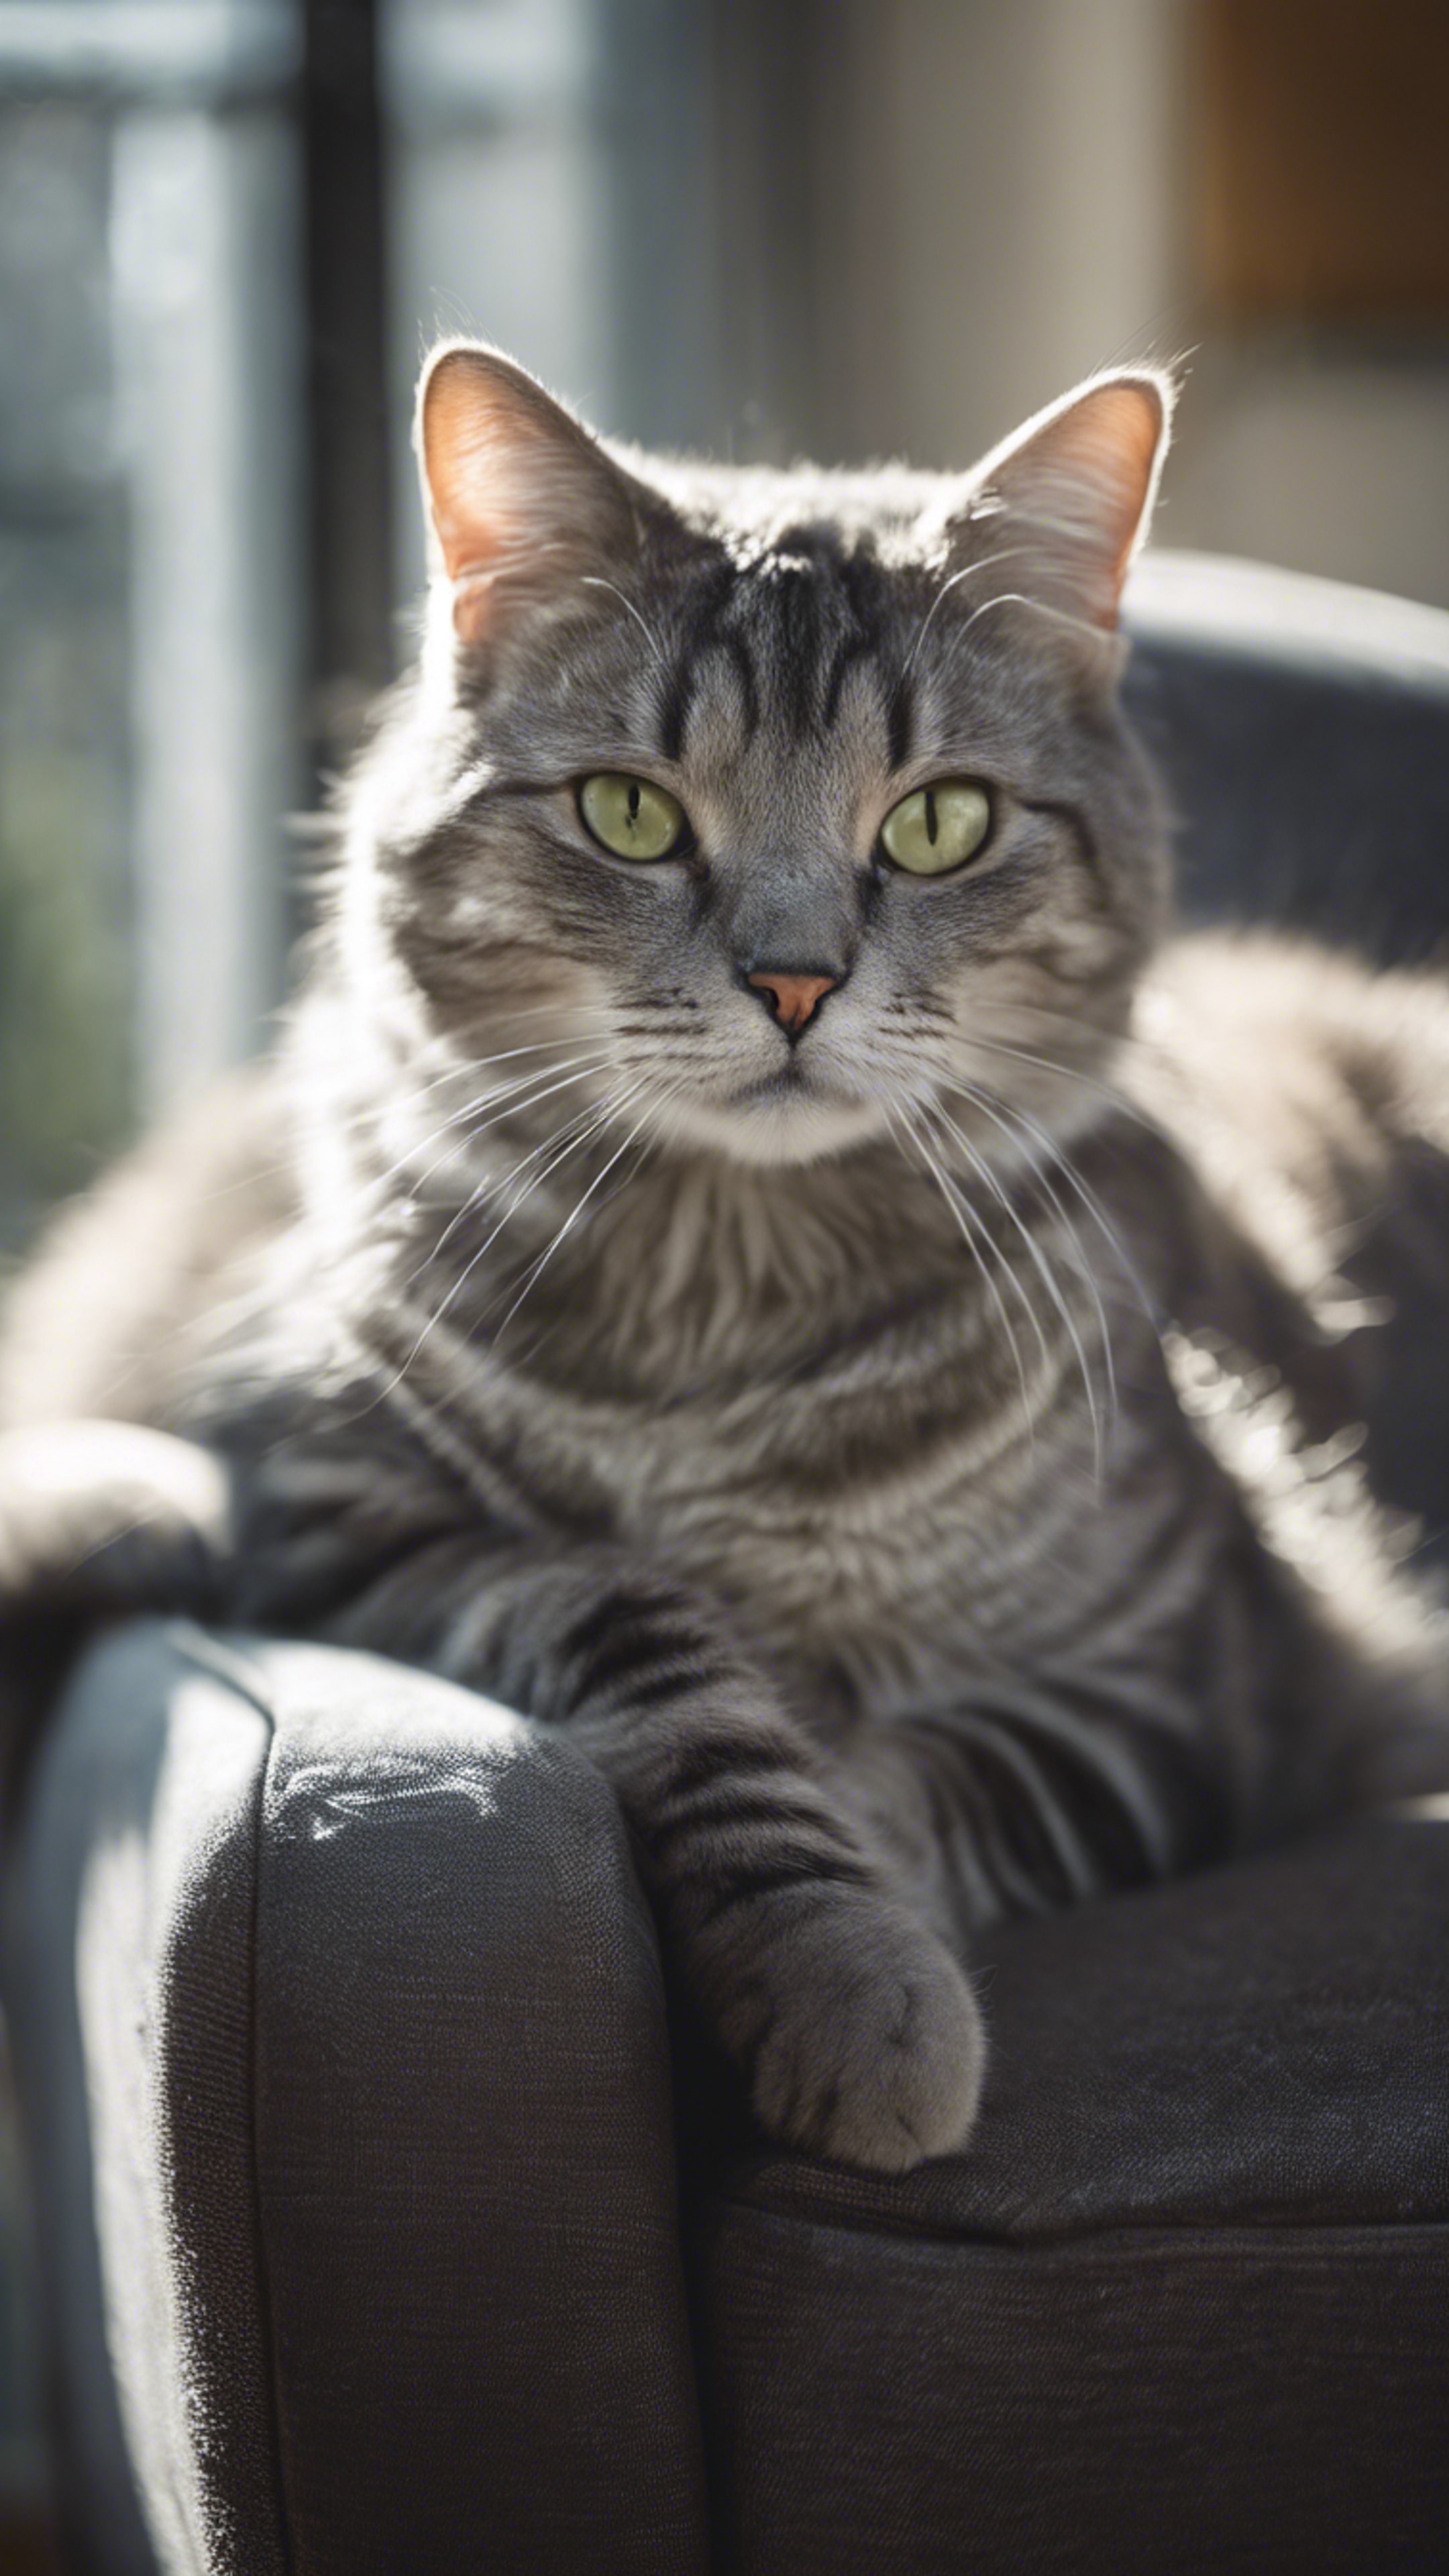 A silver gray tabby cat curled up in a chair, her fur highlighted by daylight streaming through a nearby window.壁紙[04135cc69b2c493b883e]